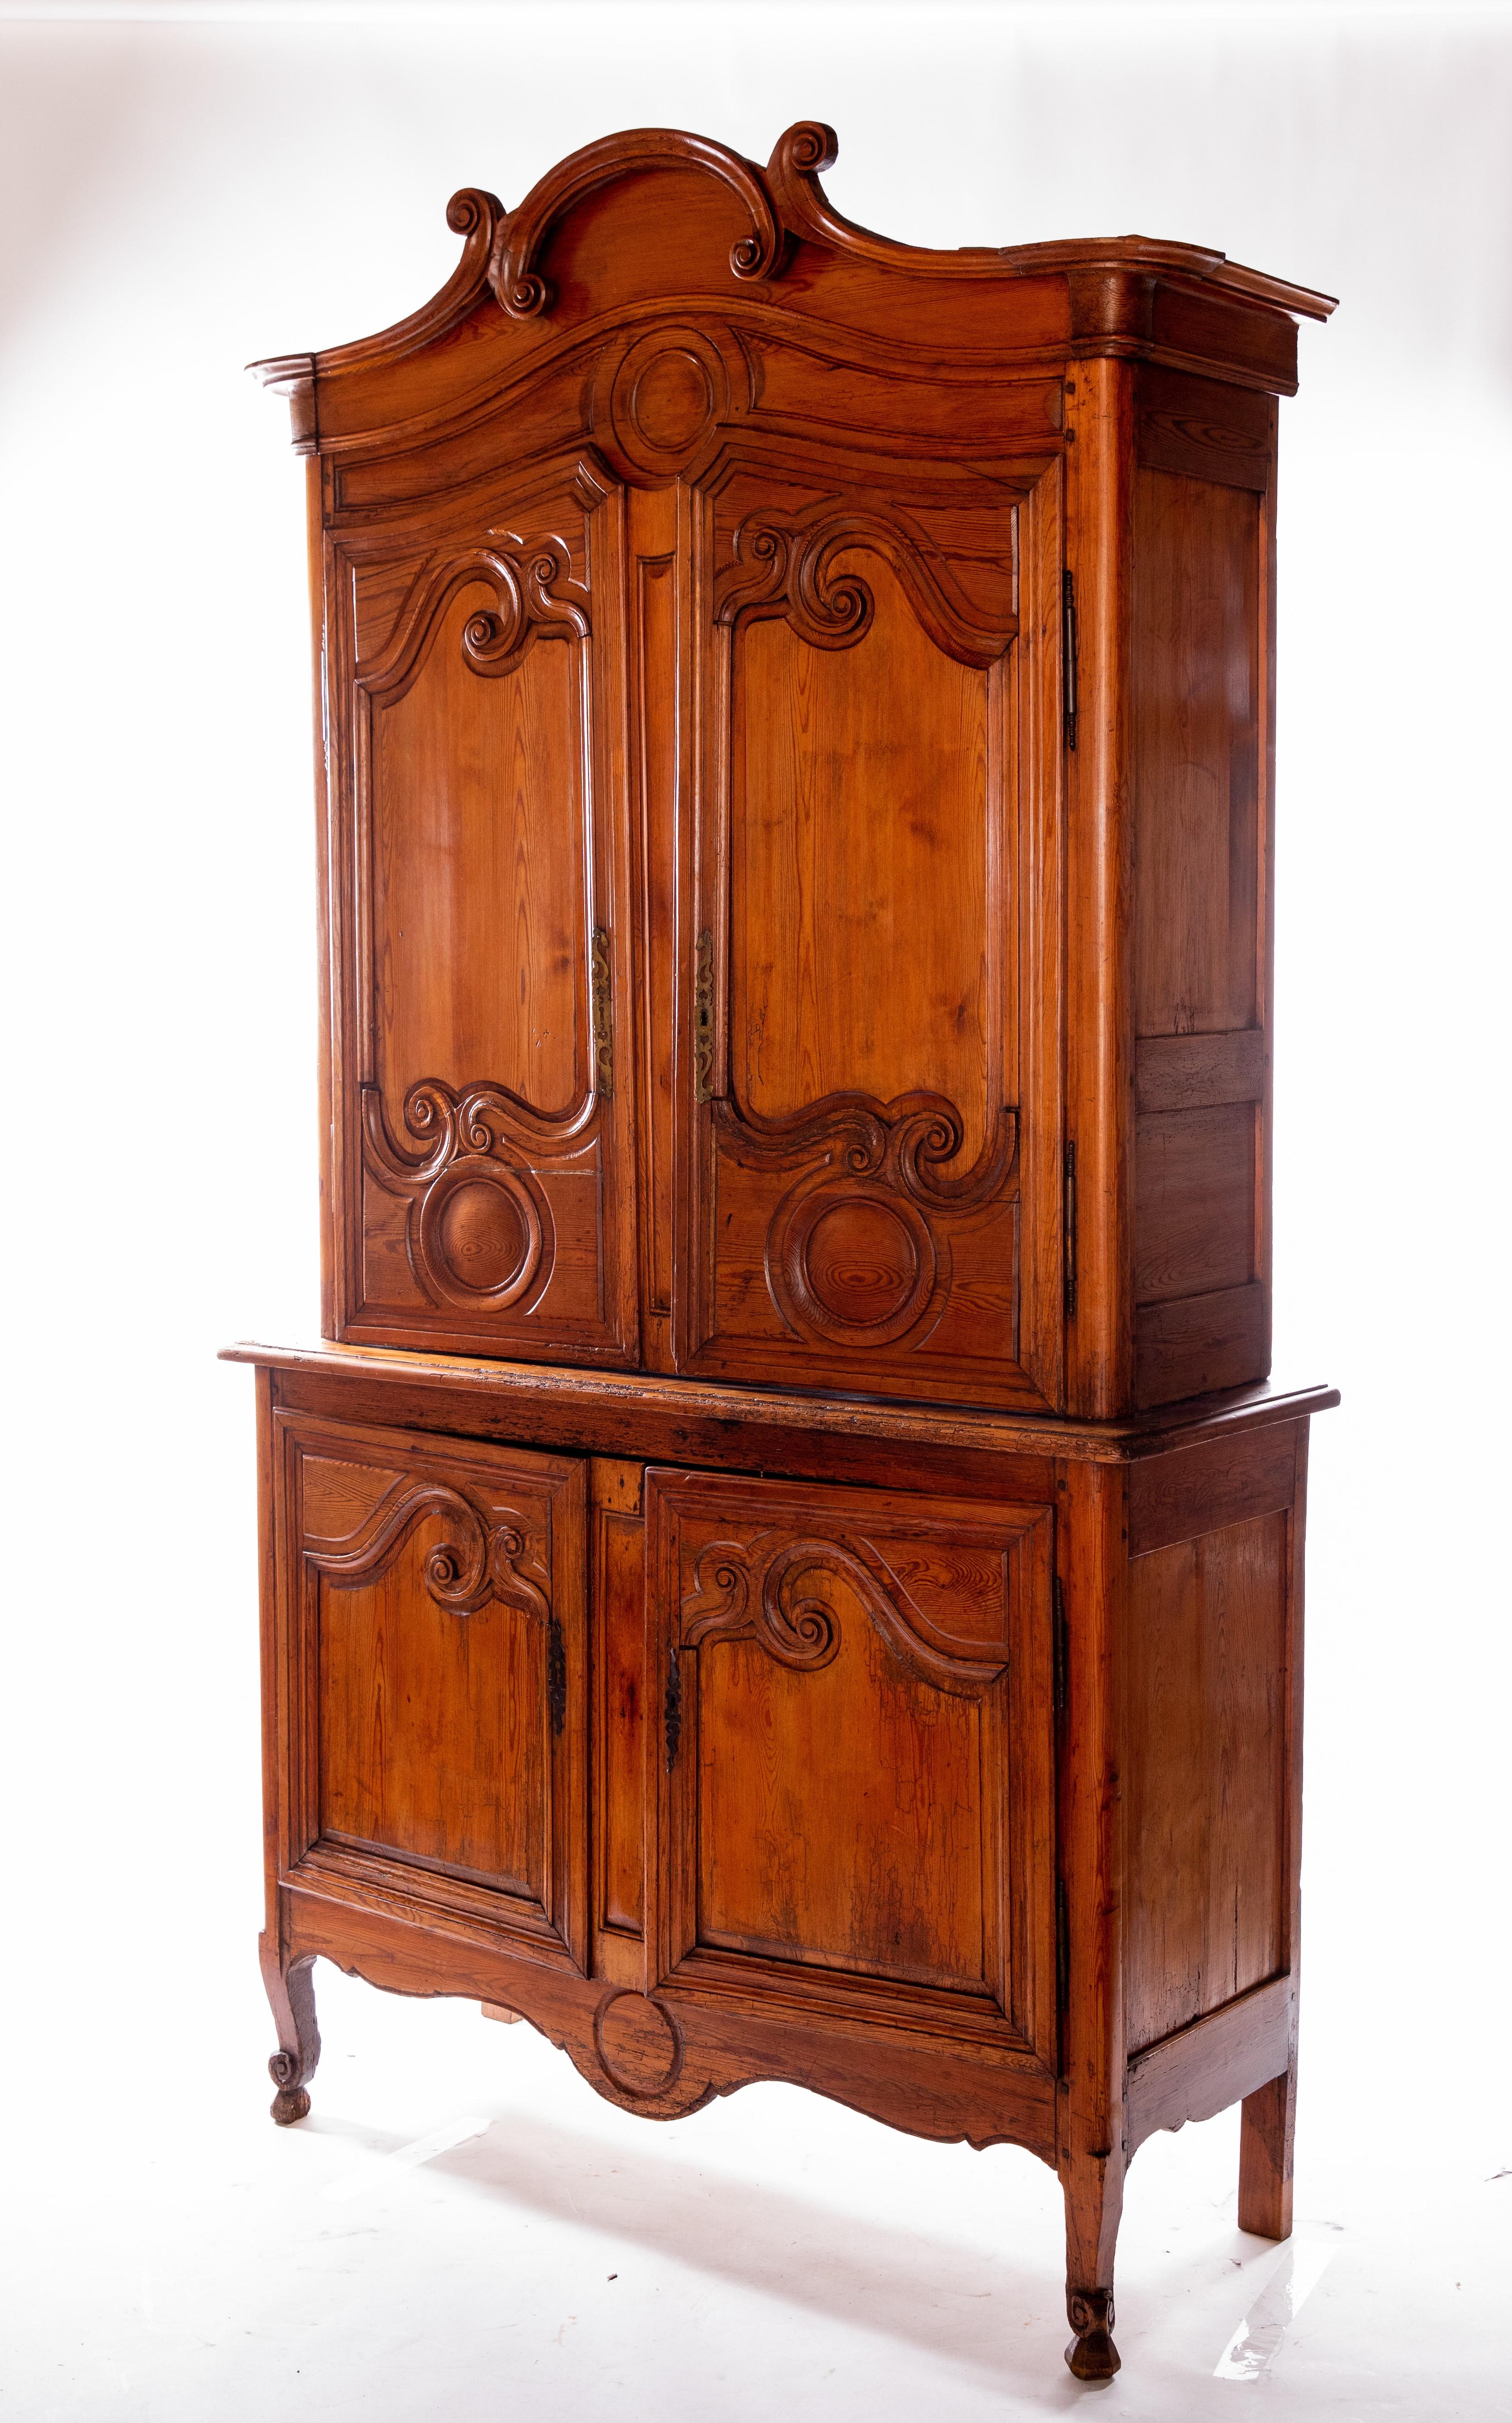 Beautiful hand-carved 18th-century French hutch.